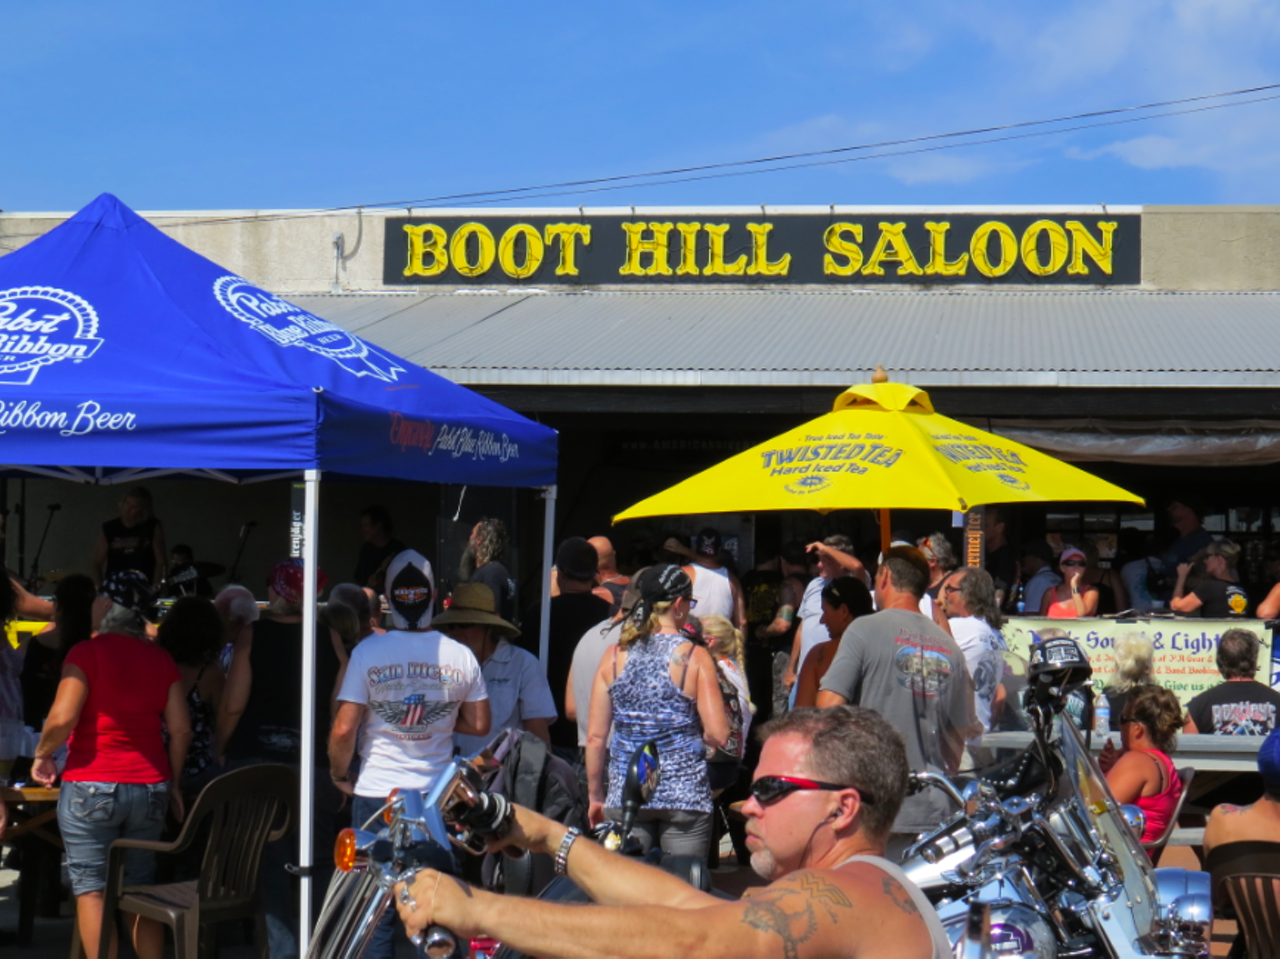 Boot Hill Saloon
310 Main St. Bridge, Daytona Beach
Bikers just can't get enough of the Boot Hill Saloon in Daytona Beach. Even in death, some bikers make a pit stop at their favorite watering hole and have a riotous time. The spirits here make the jukebox play even when unplugged, hurl items across the bar and turn on the faucets in the bathroom when no one is around.